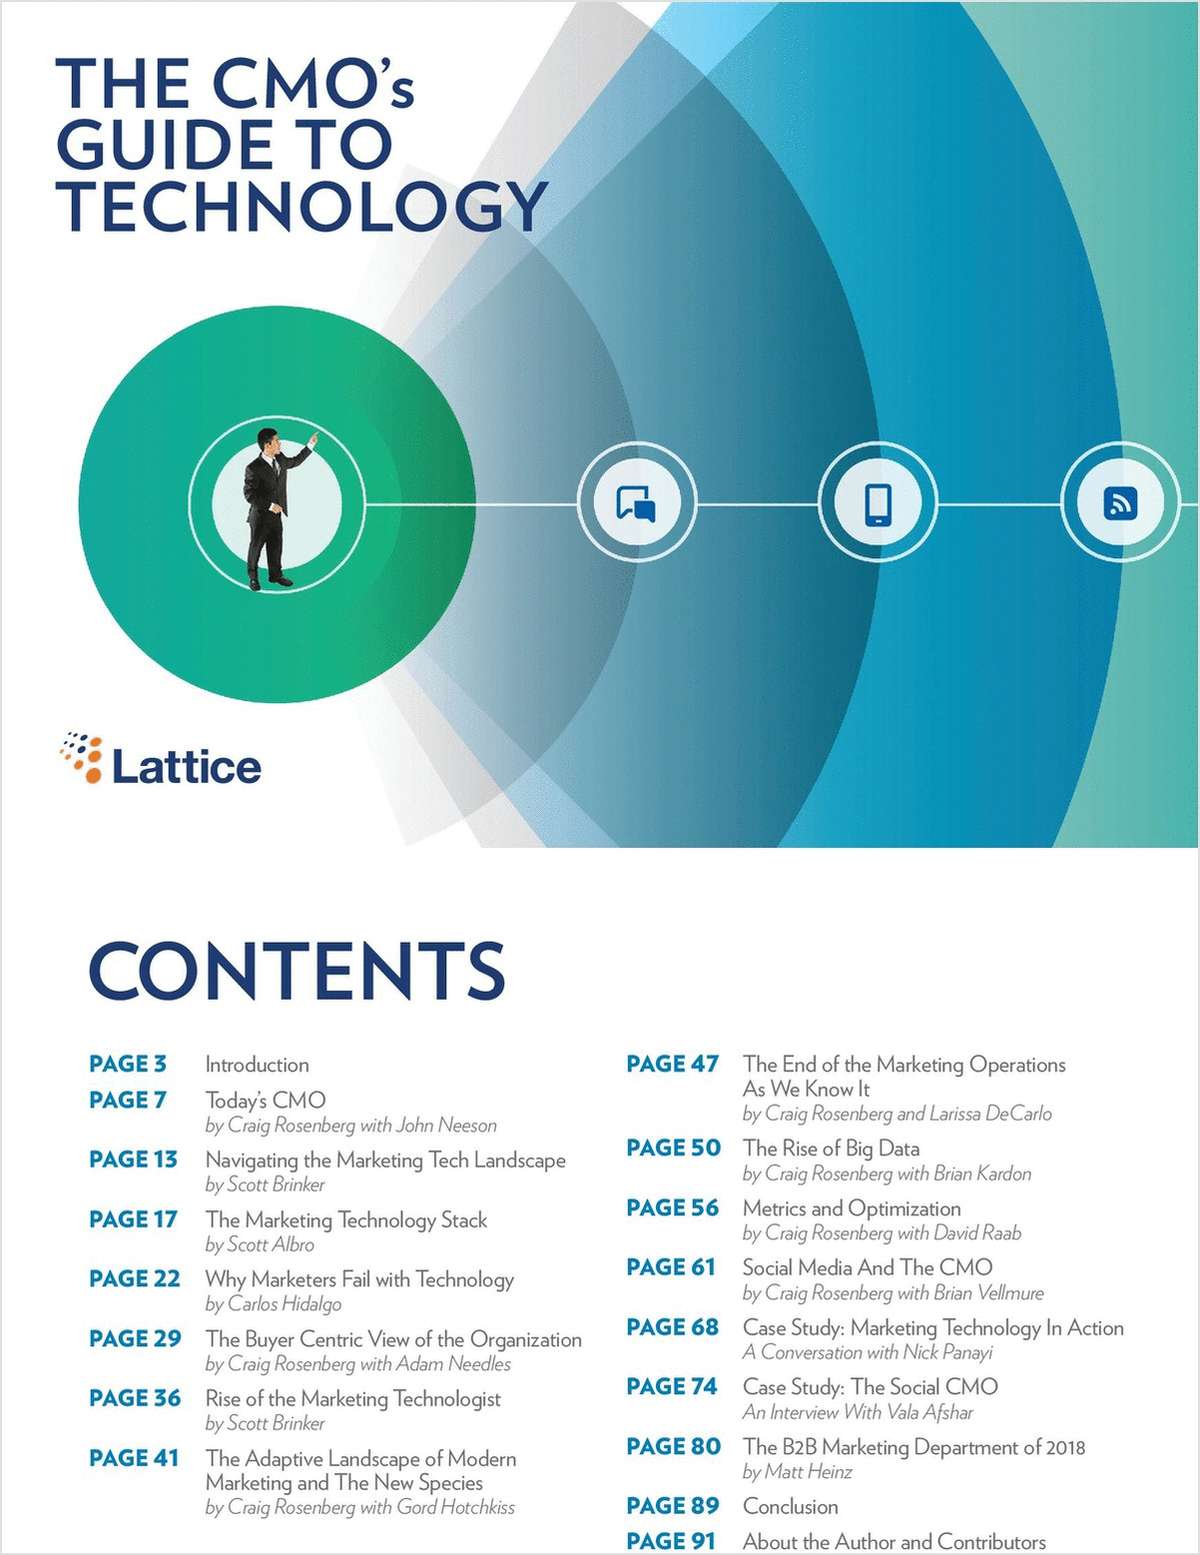 The Ultimate Technology Guide for CMOs